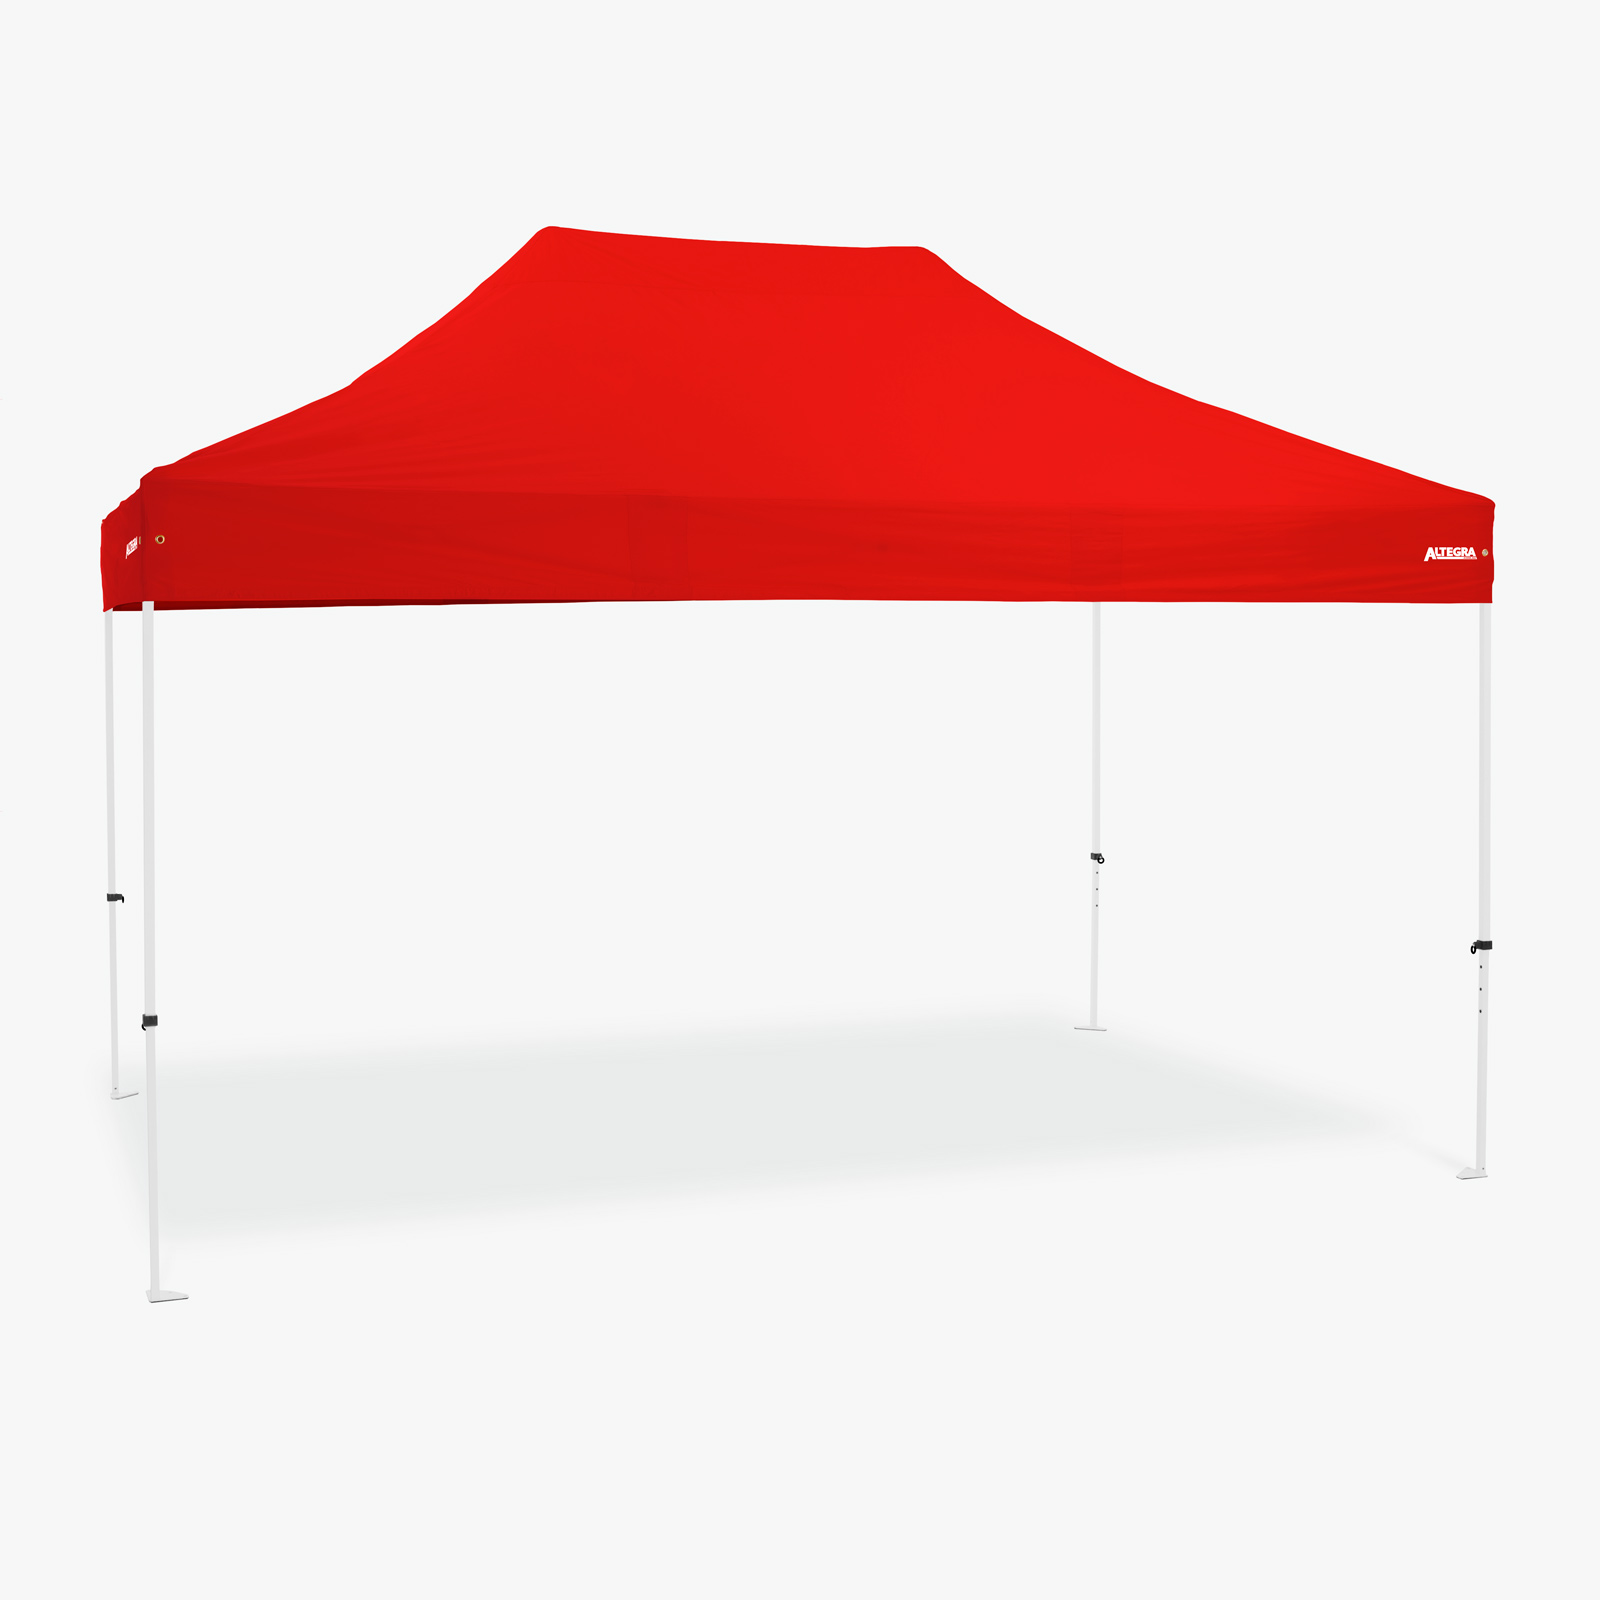 Altegra Premium Steel 3x4.5m gazebo in red - our affordable gazebo frame topped with our Elite canopy that leads Australia in protection and has 360º attachment for walls for gazebo